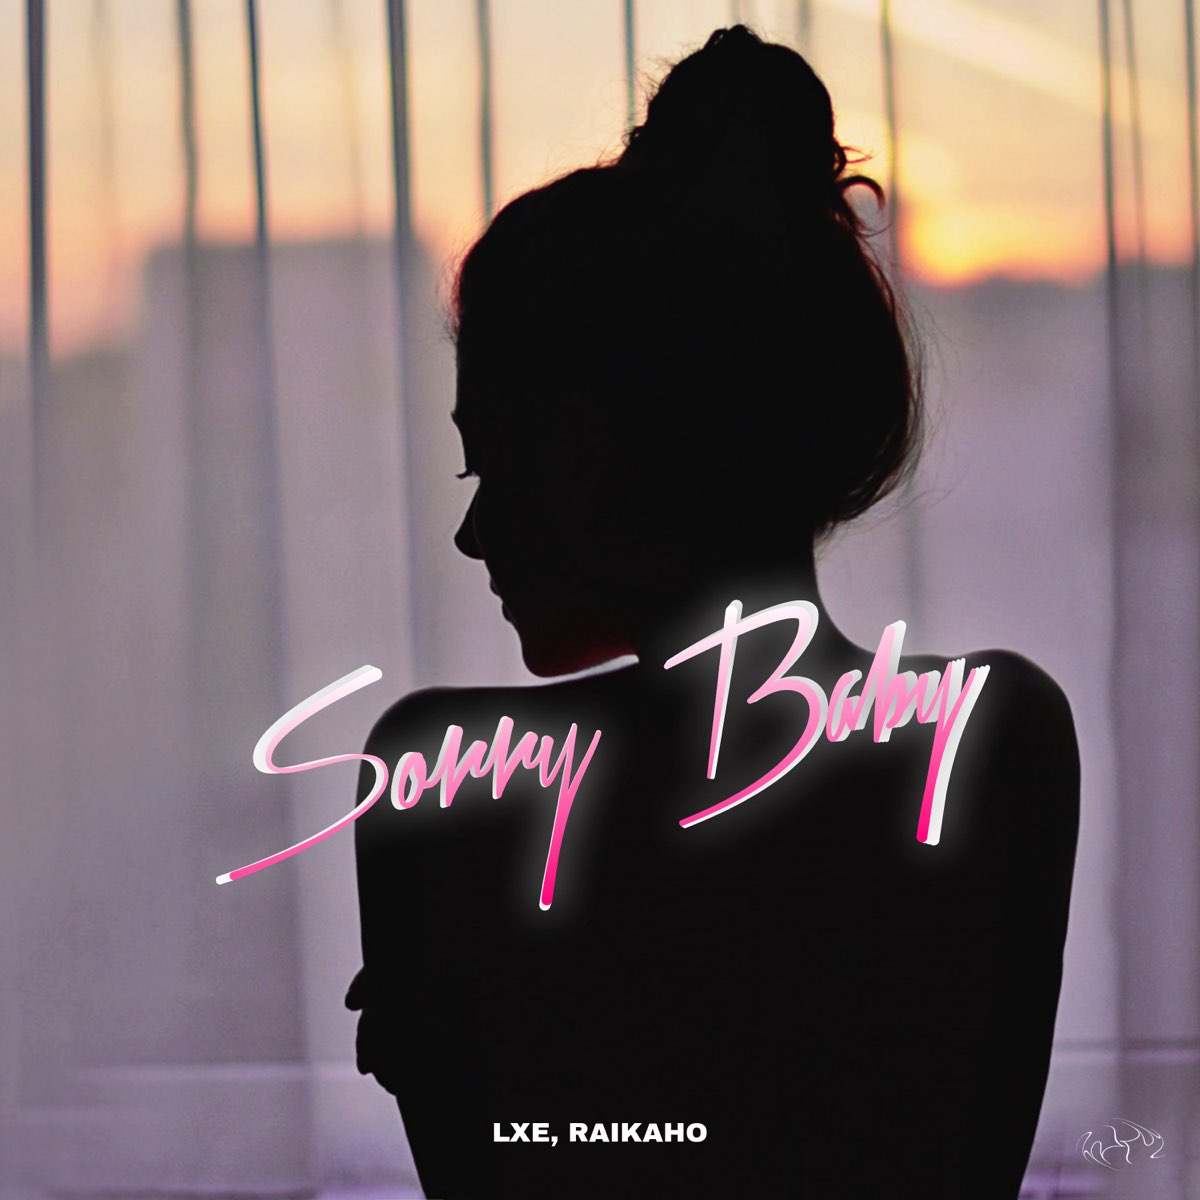 Sorry Baby - Single by LXE & RAIKAHO on Apple Music